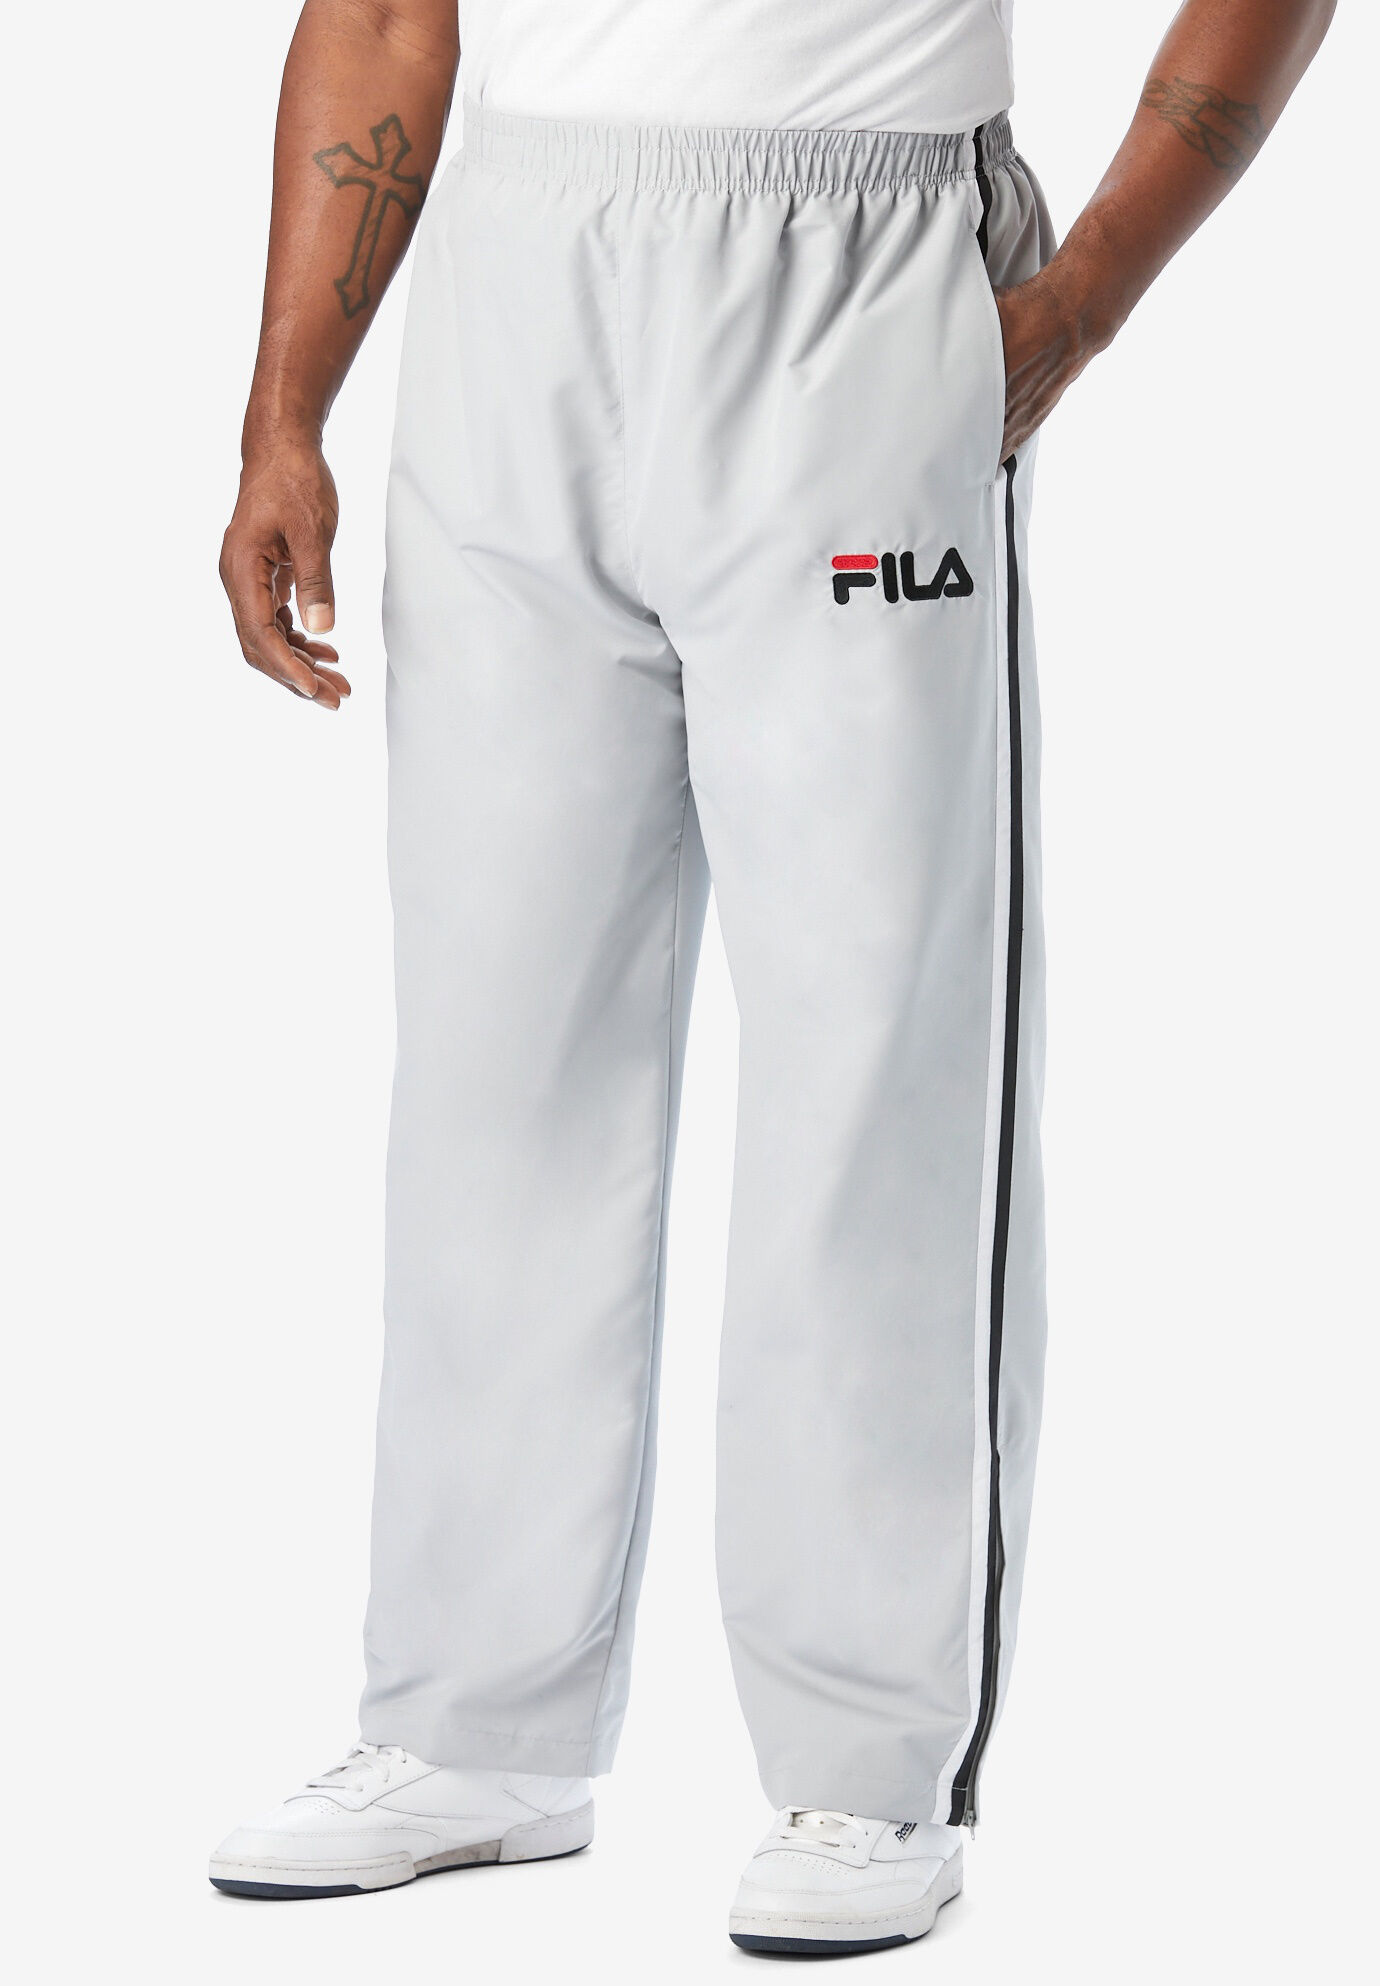 FILA Tear-Away Track Pant | Urban Outfitters Canada